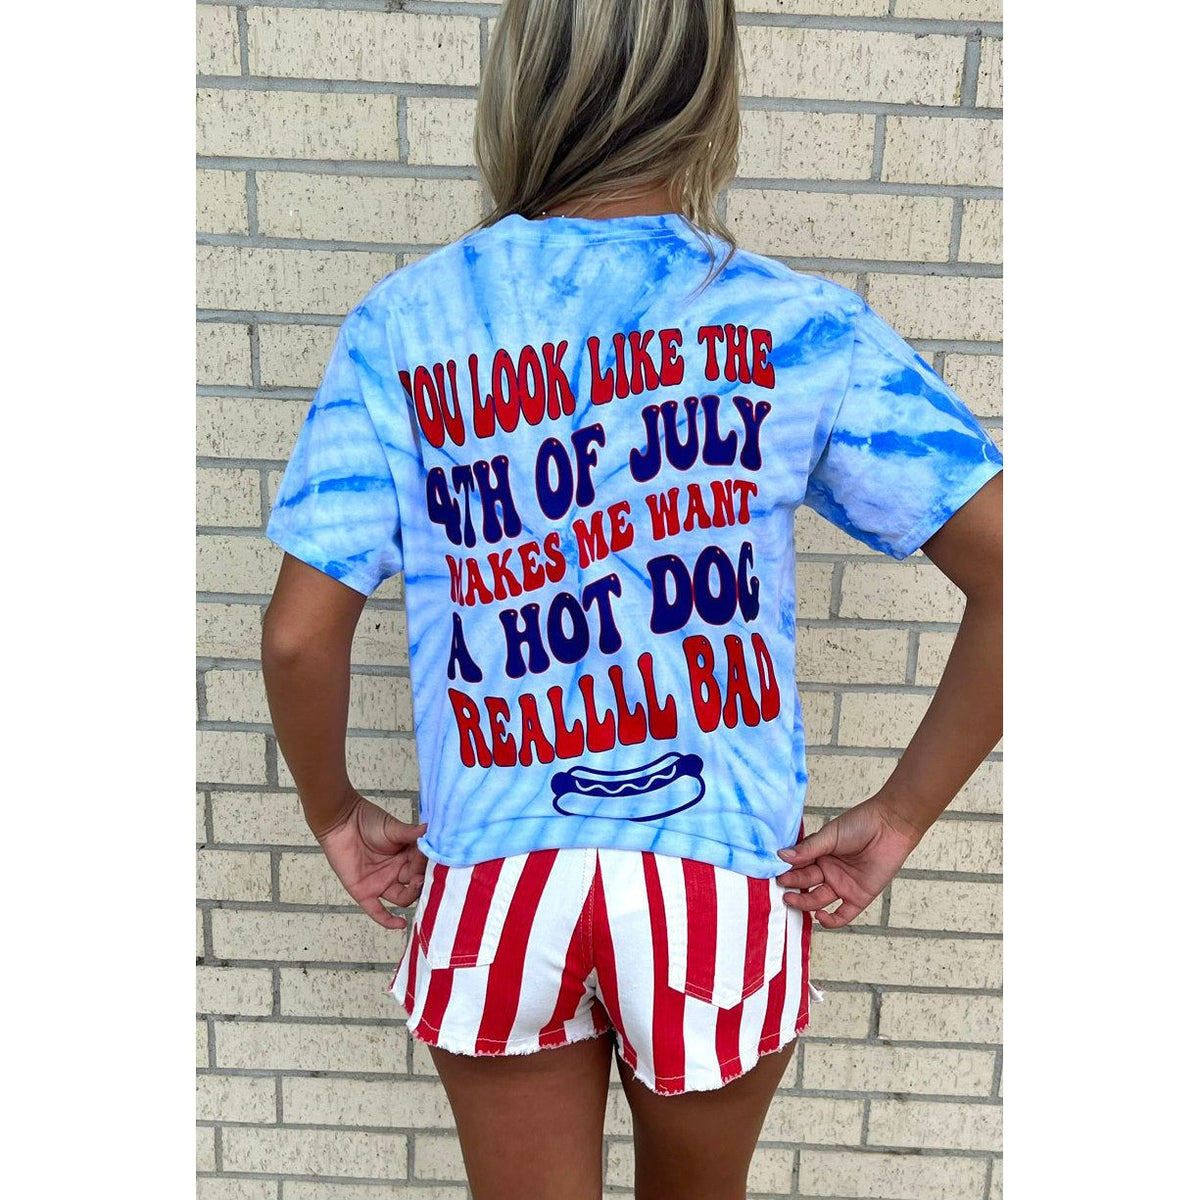 You look like the 4th of July Makes me want a Hot Dog Tee